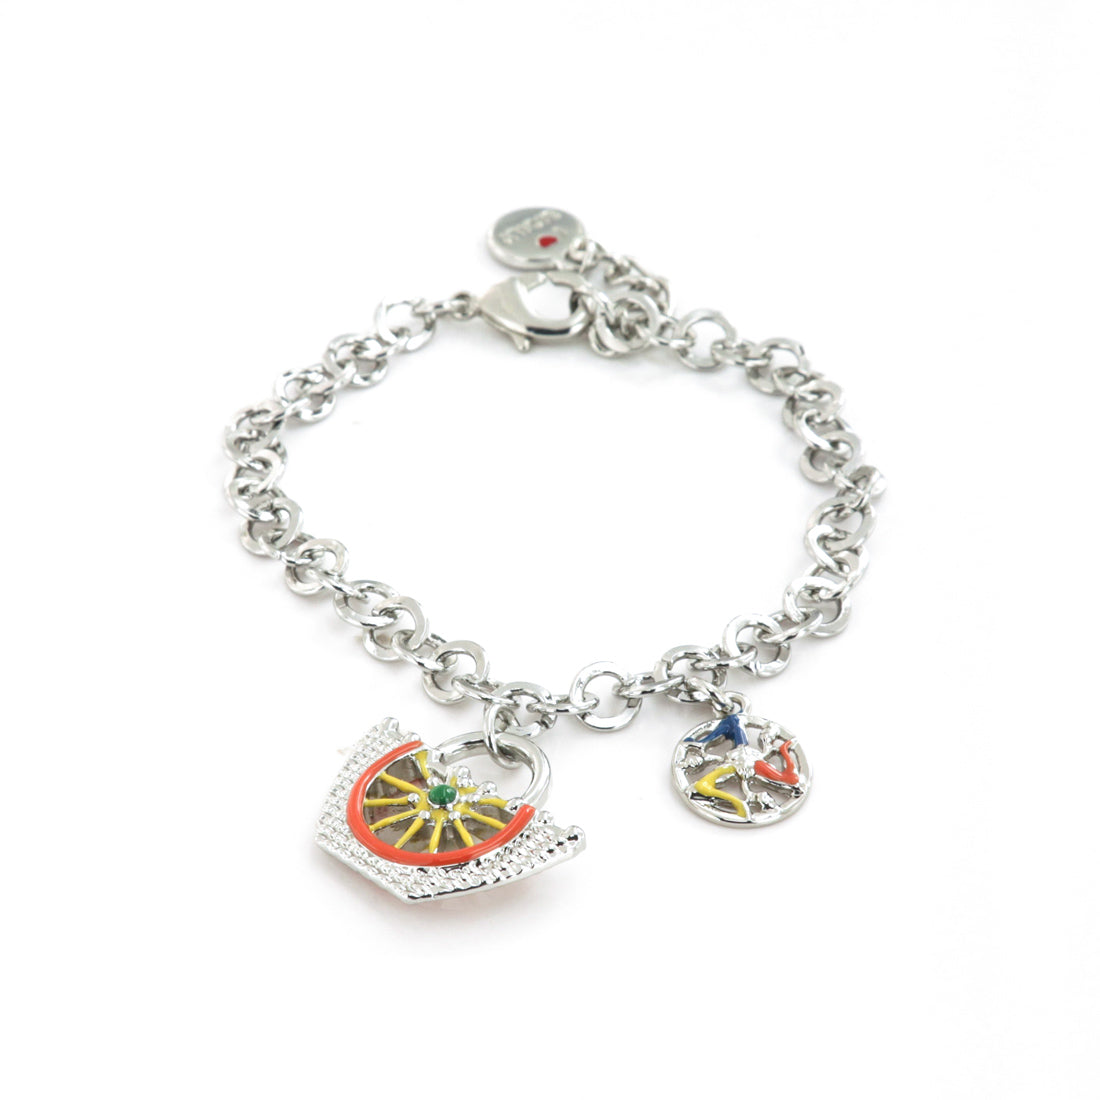 Metal bracelet rolò shirt, with Sicilian coffa embellished with a car wheel carboard in colored glazes